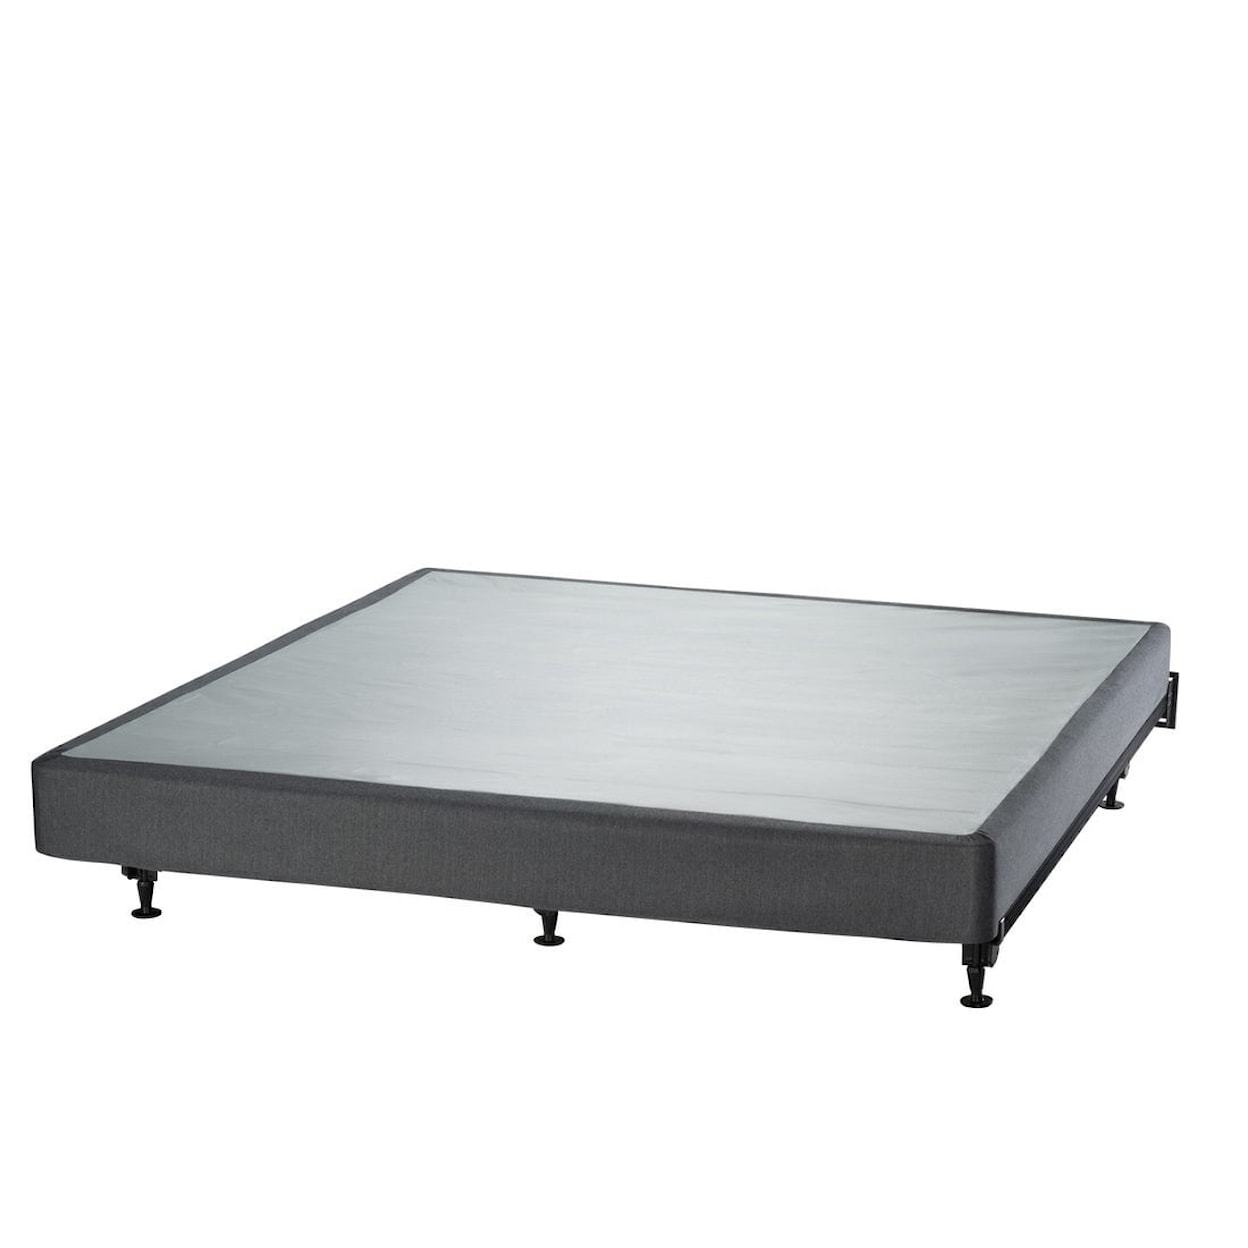 White Dove Mattress Duality Tufted Foundations Queen Lo Pro 5" Foundation